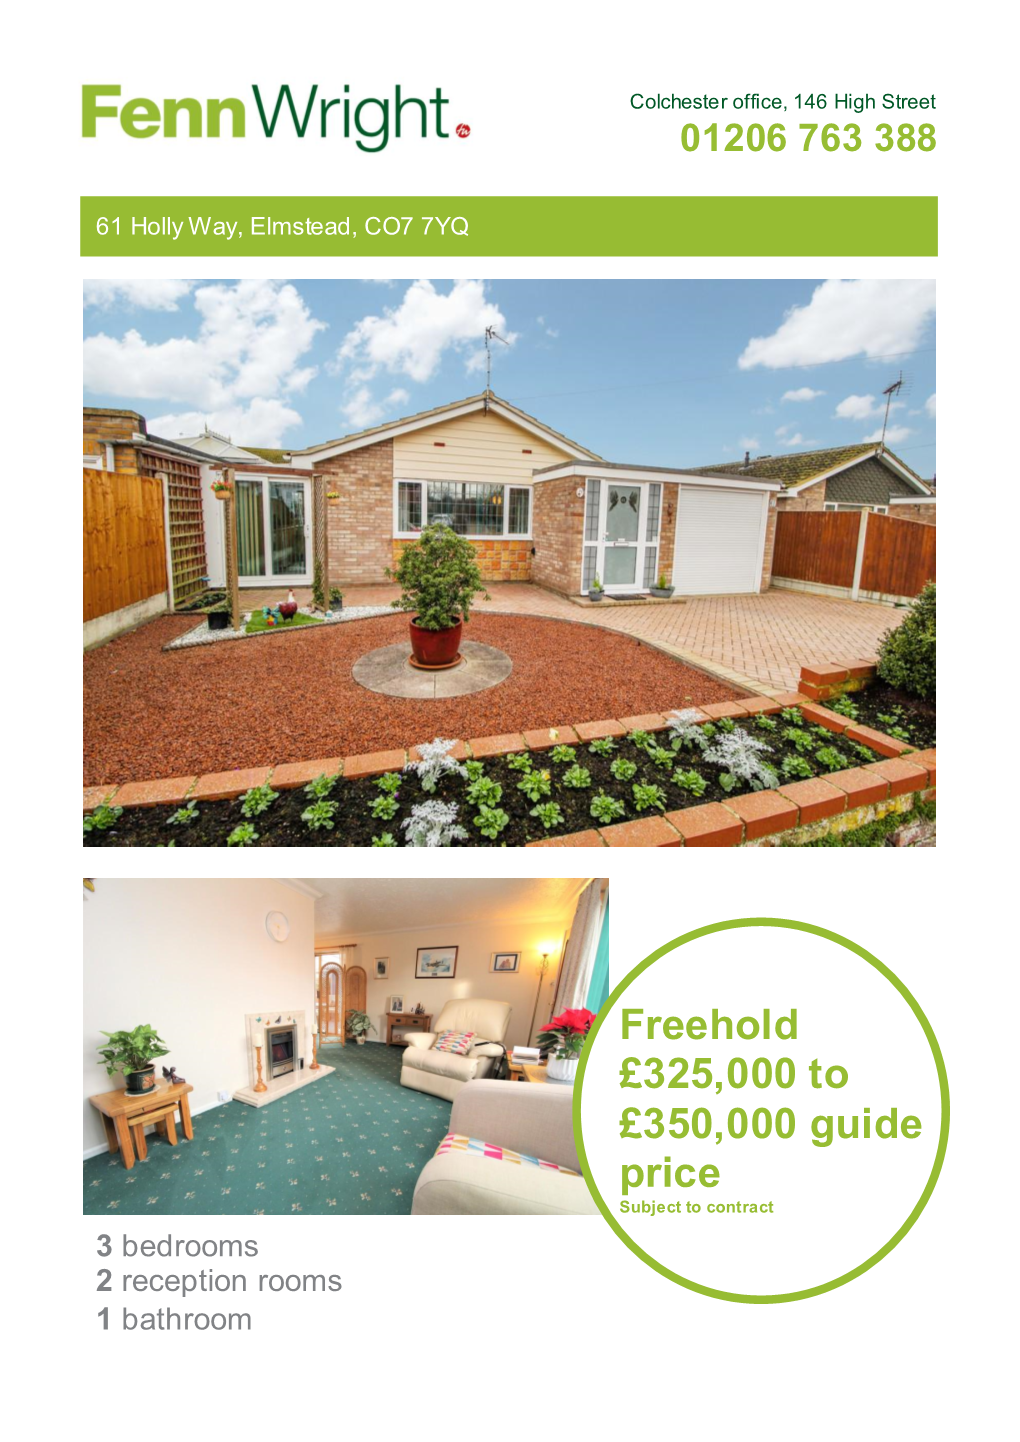 Freehold £325,000 to £350,000 Guide Price Subject to Contract